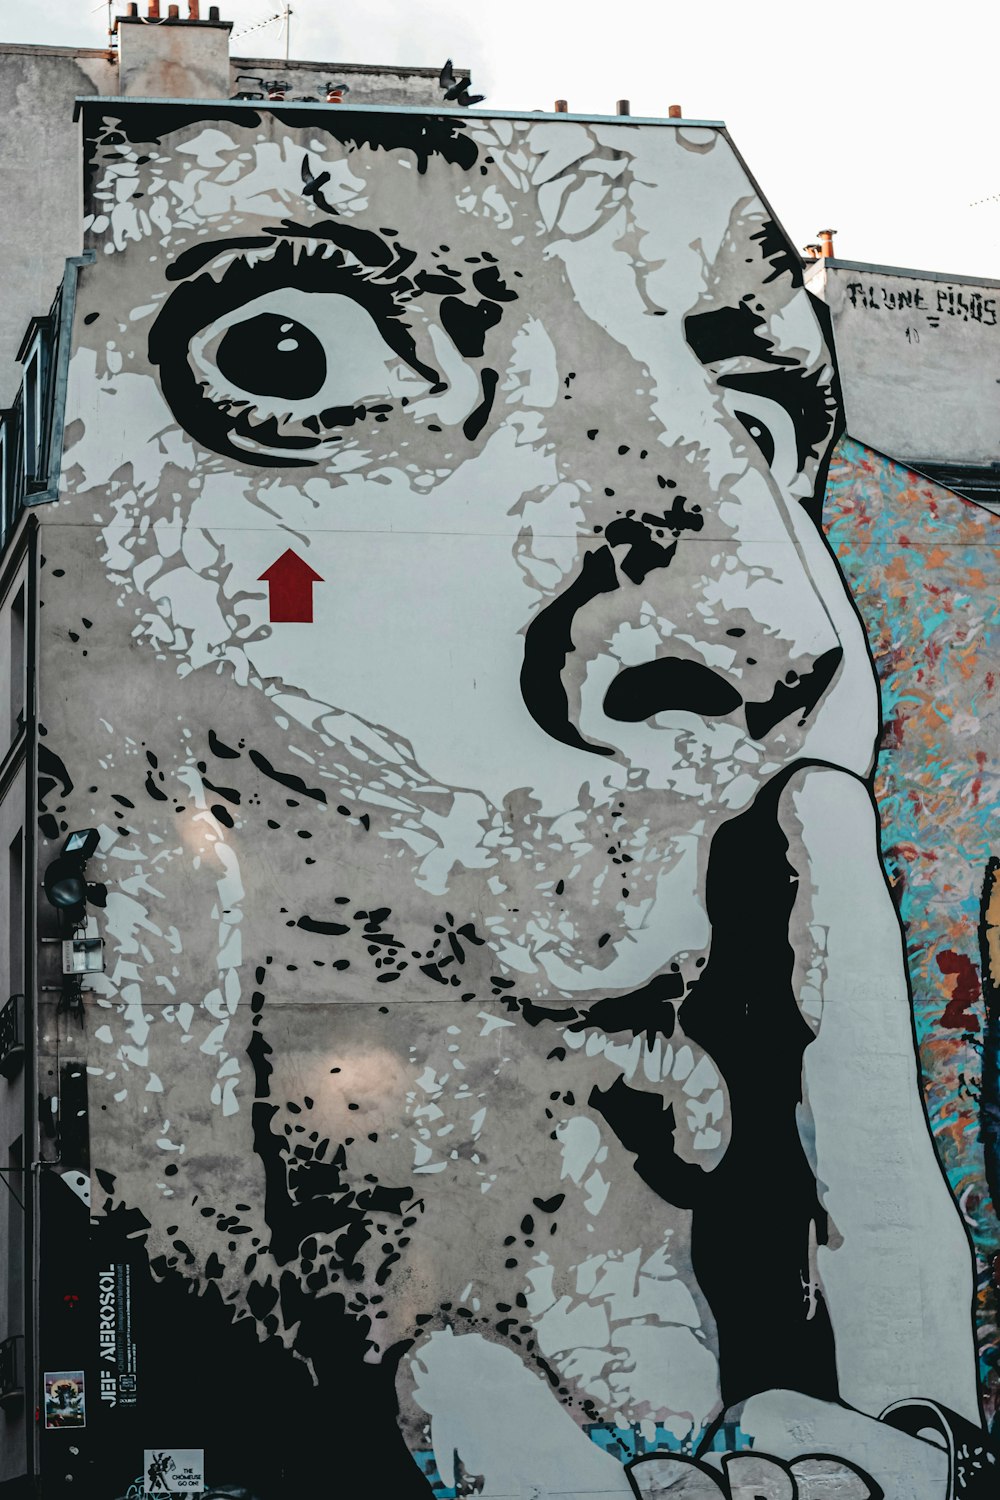 a large painting of a man's face on the side of a building